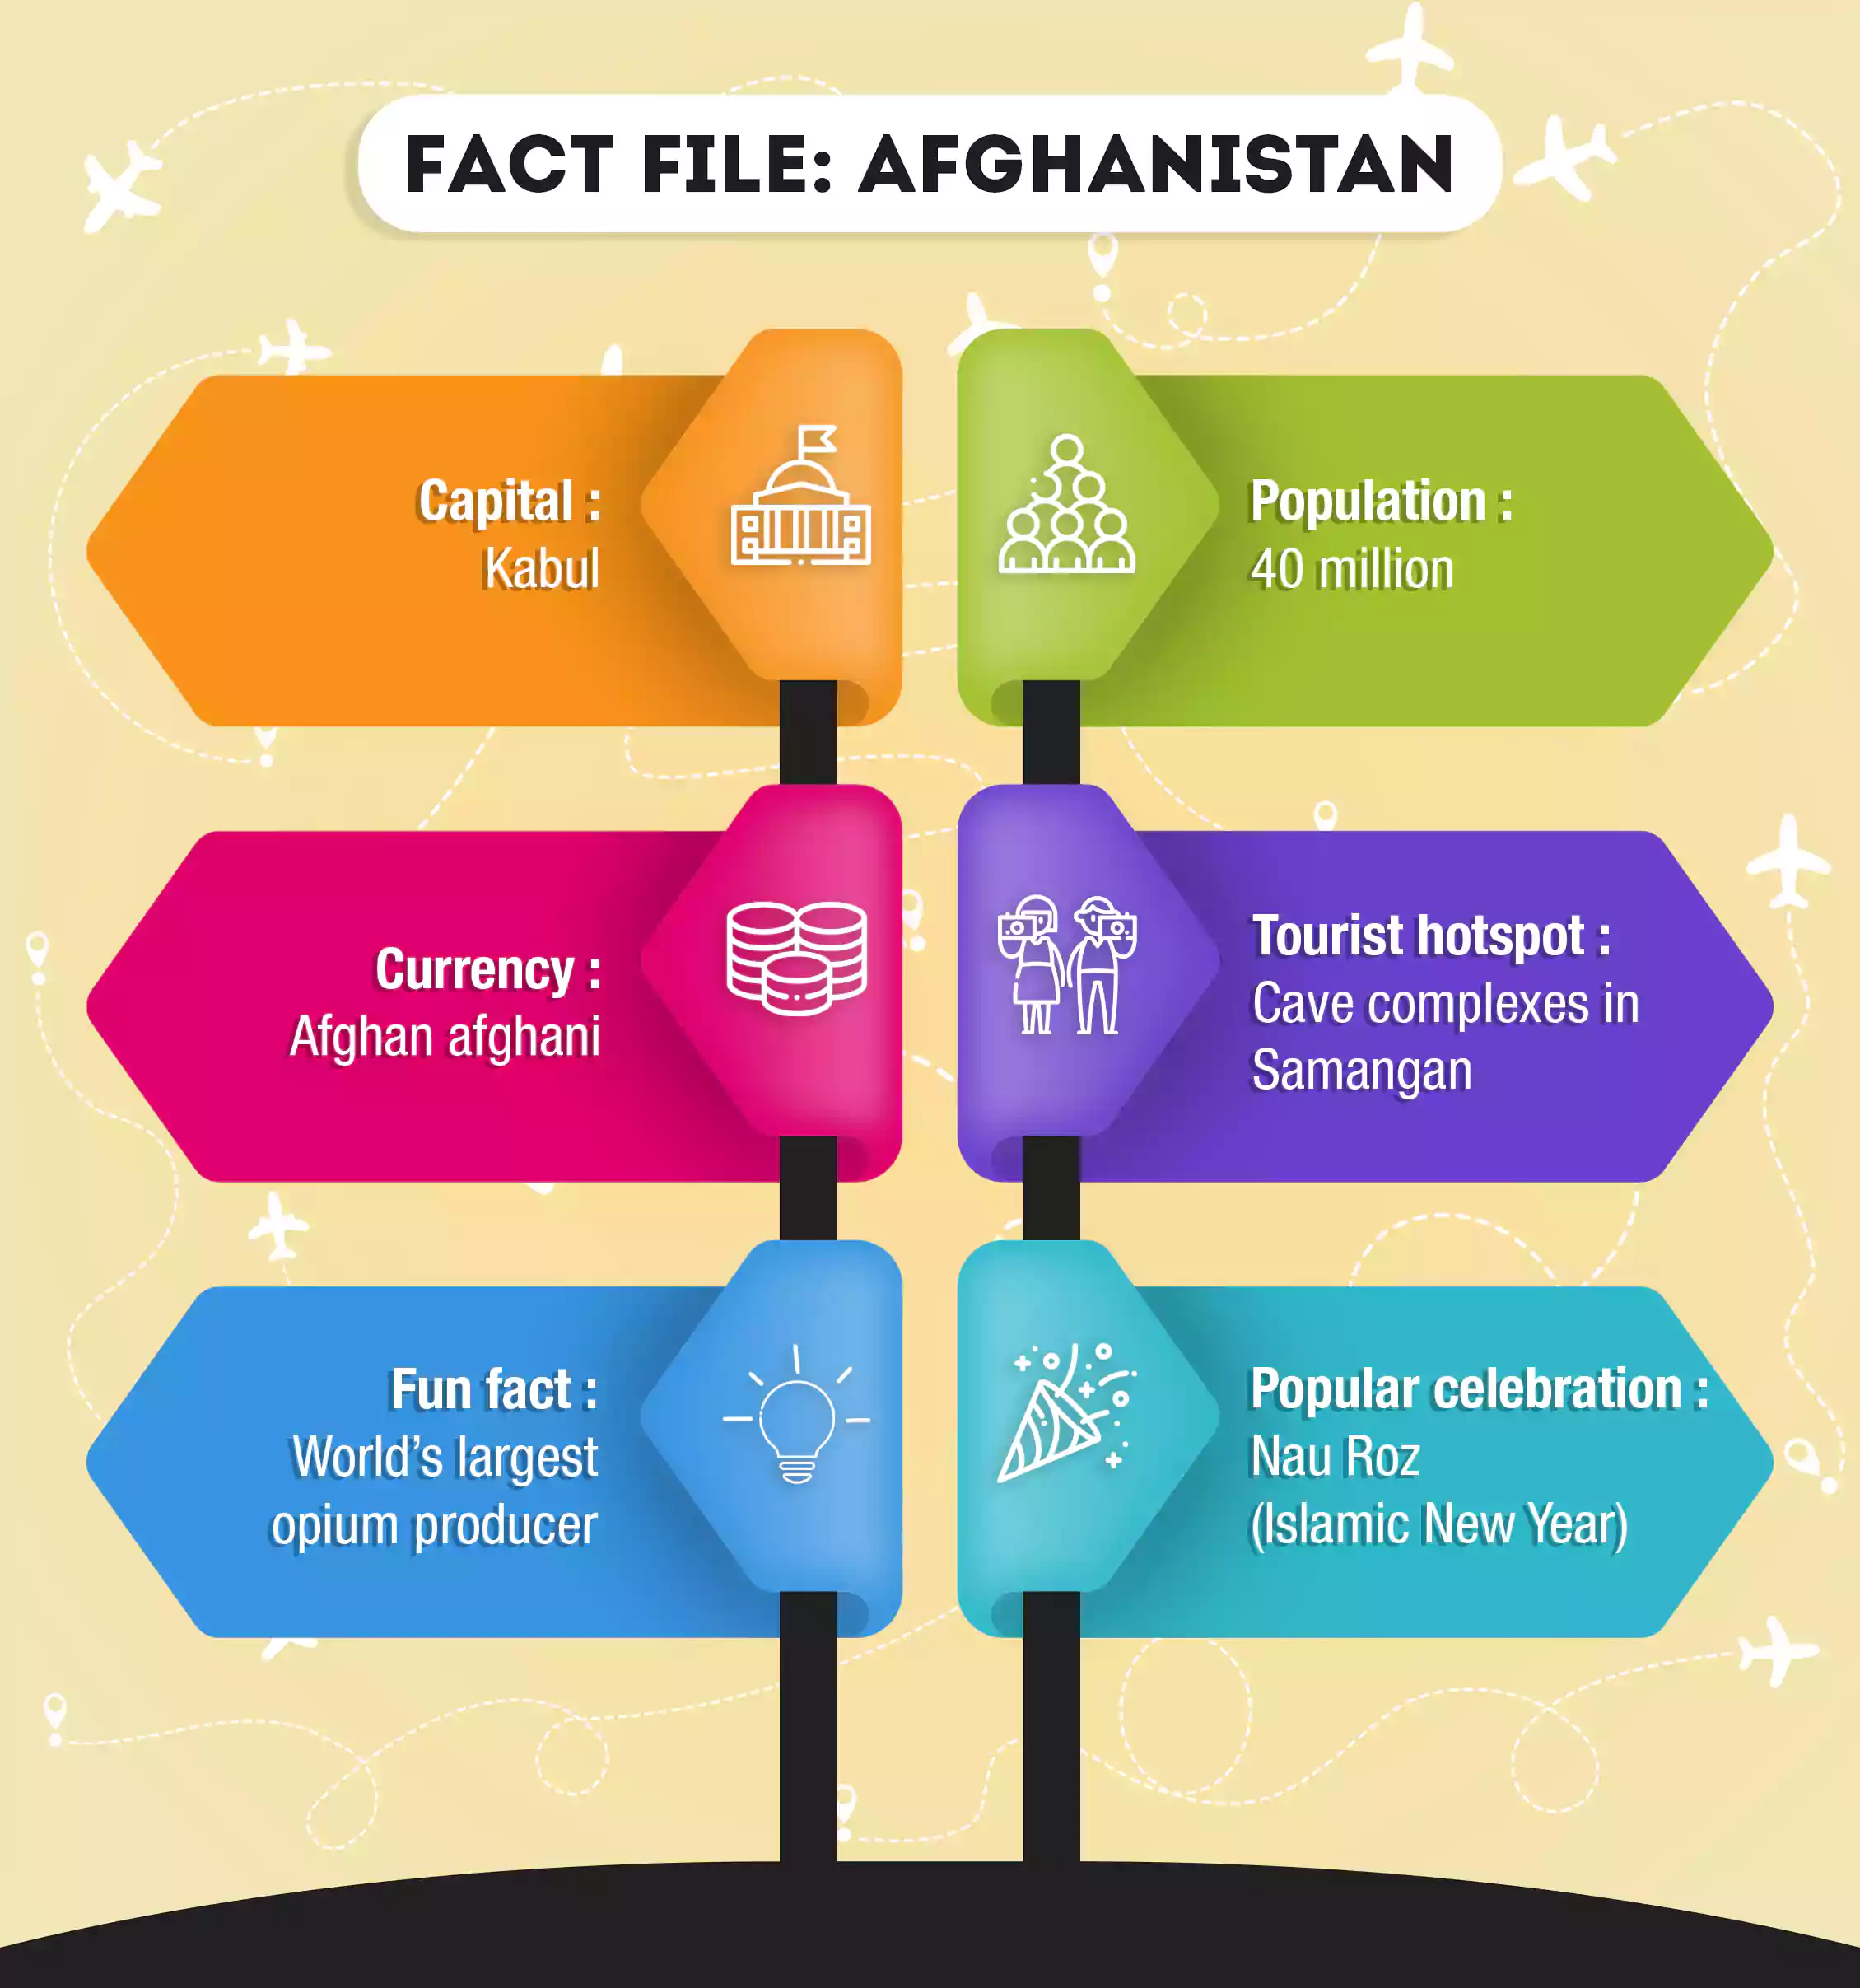 A fact file of Afghanistan